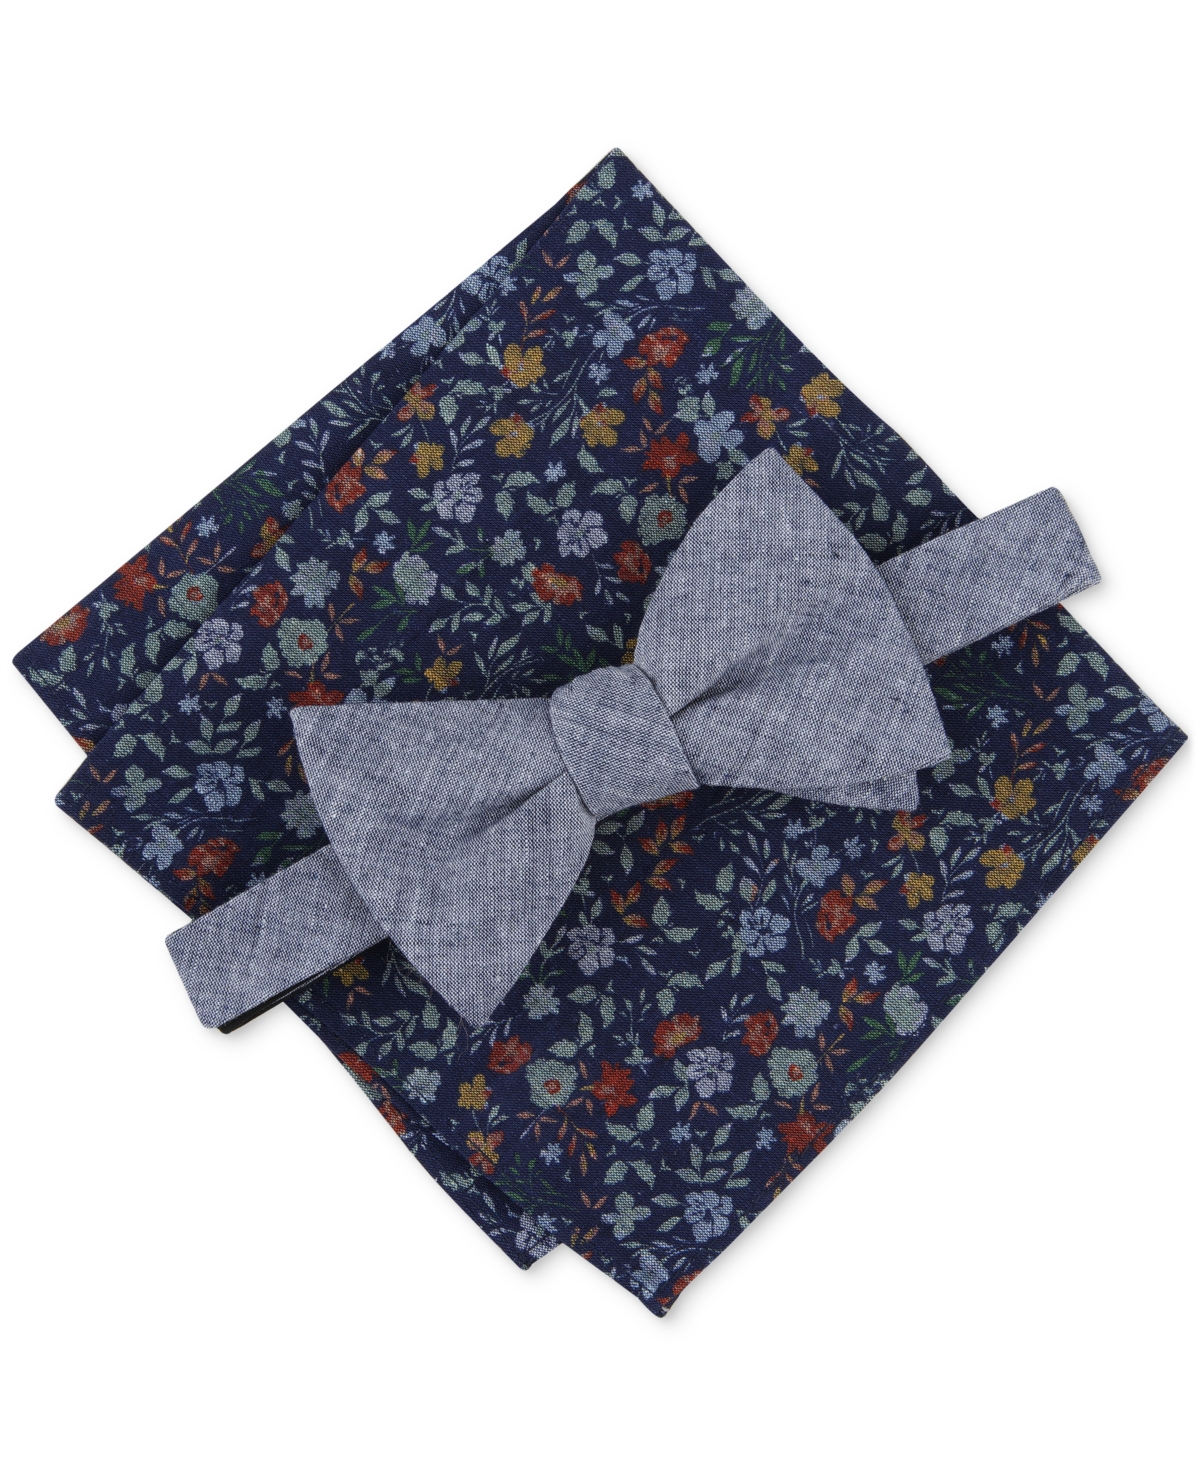 Men's Kanupp Solid Bow Tie & Floral Pocket Square Set, Created for Macy's - Navy